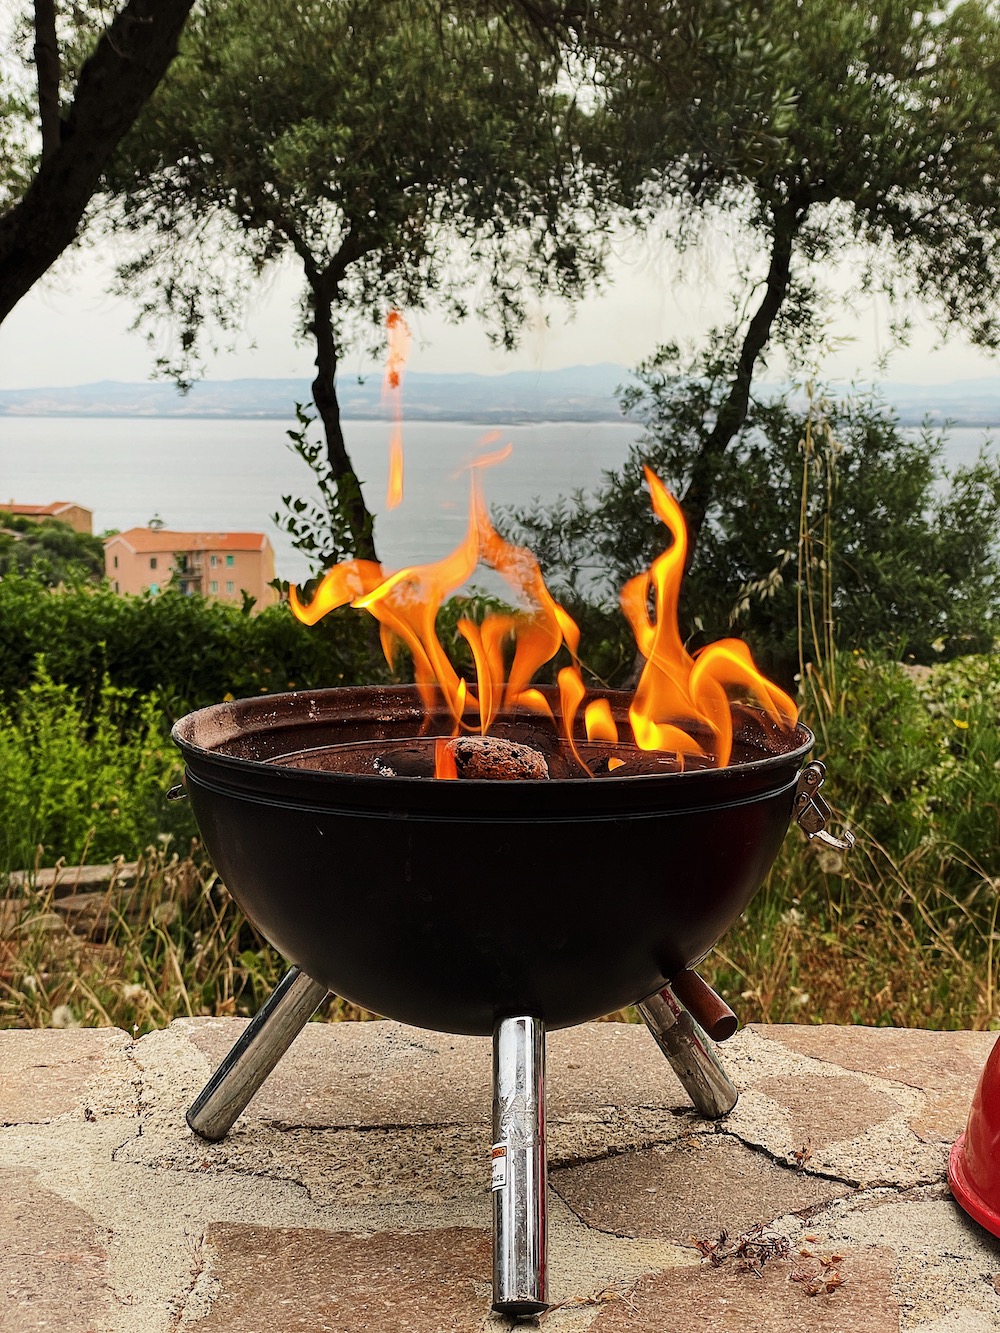 barbecue in Tuscany